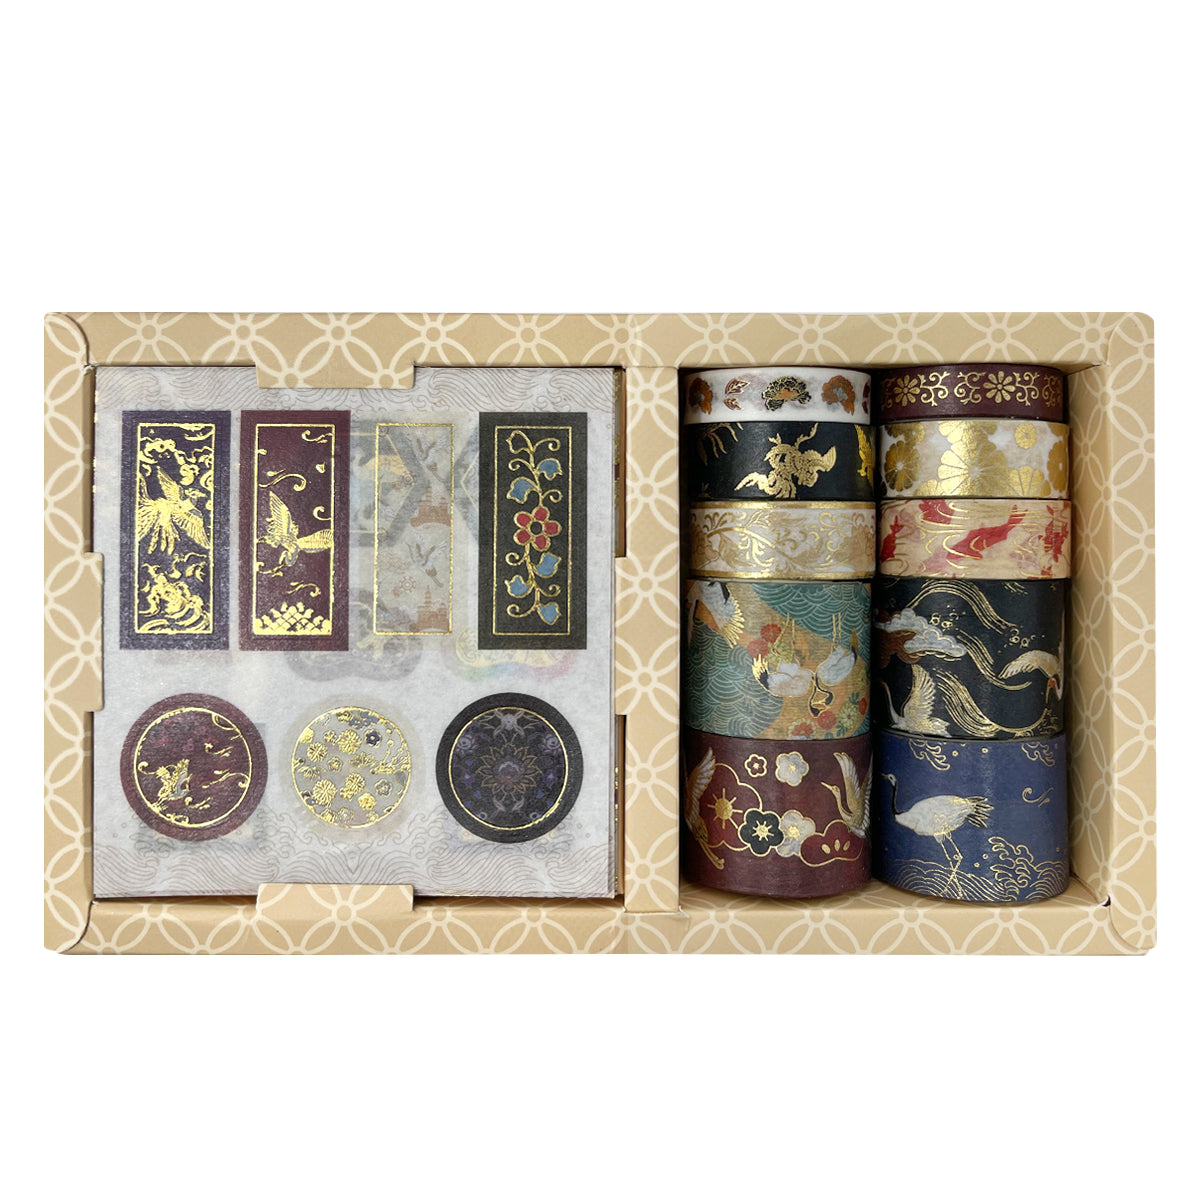 Wrapables Decorative Gold Foil Washi Tape and Sticker Set for Stationery, Diary, Card Making (10 Rolls & 10 Sheets) Celestial Beings